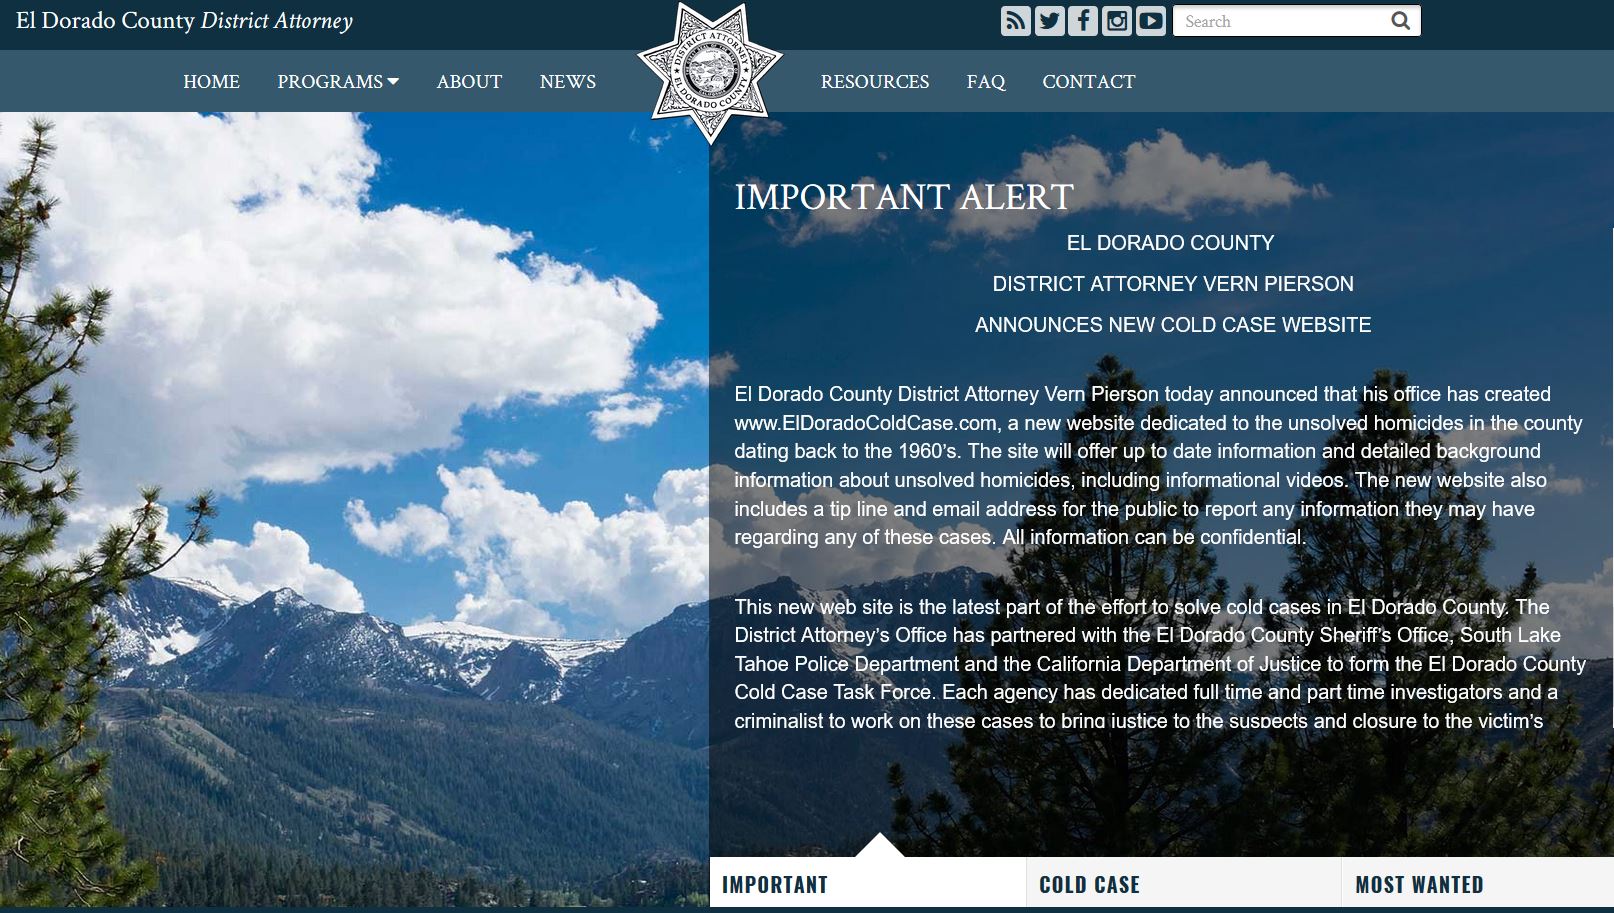 This screenshot shows the new El Dorado County District Attorney Micro-Site developed by CTS as part of their Social Media Marketing Strategy